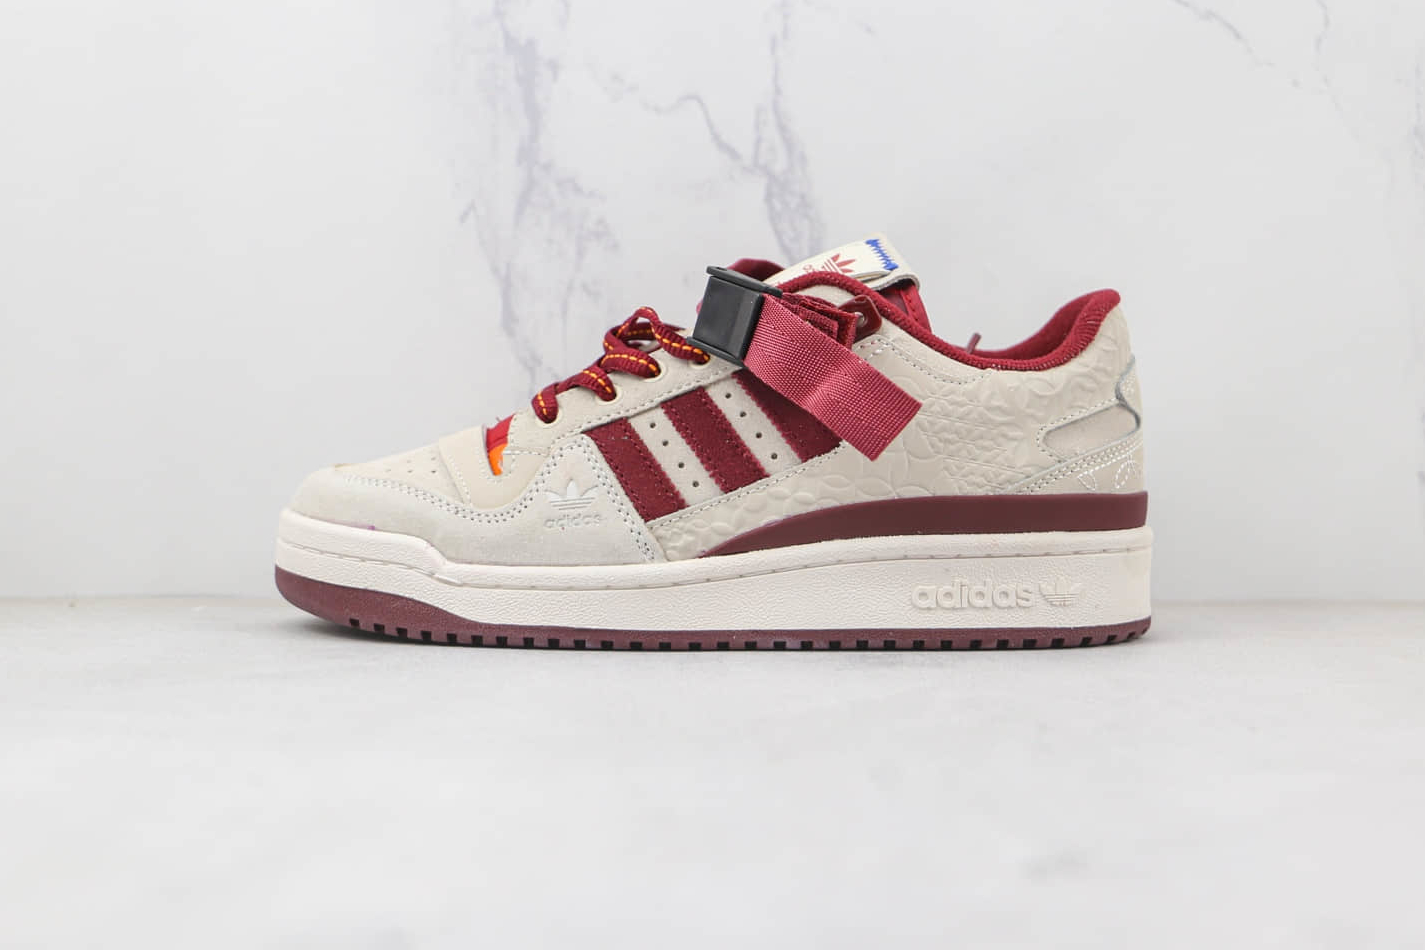 Adidas Originals Forum Low CNY Sneaker Unisex Beige White Red GX8866 - Limited edition Lunar New Year style.